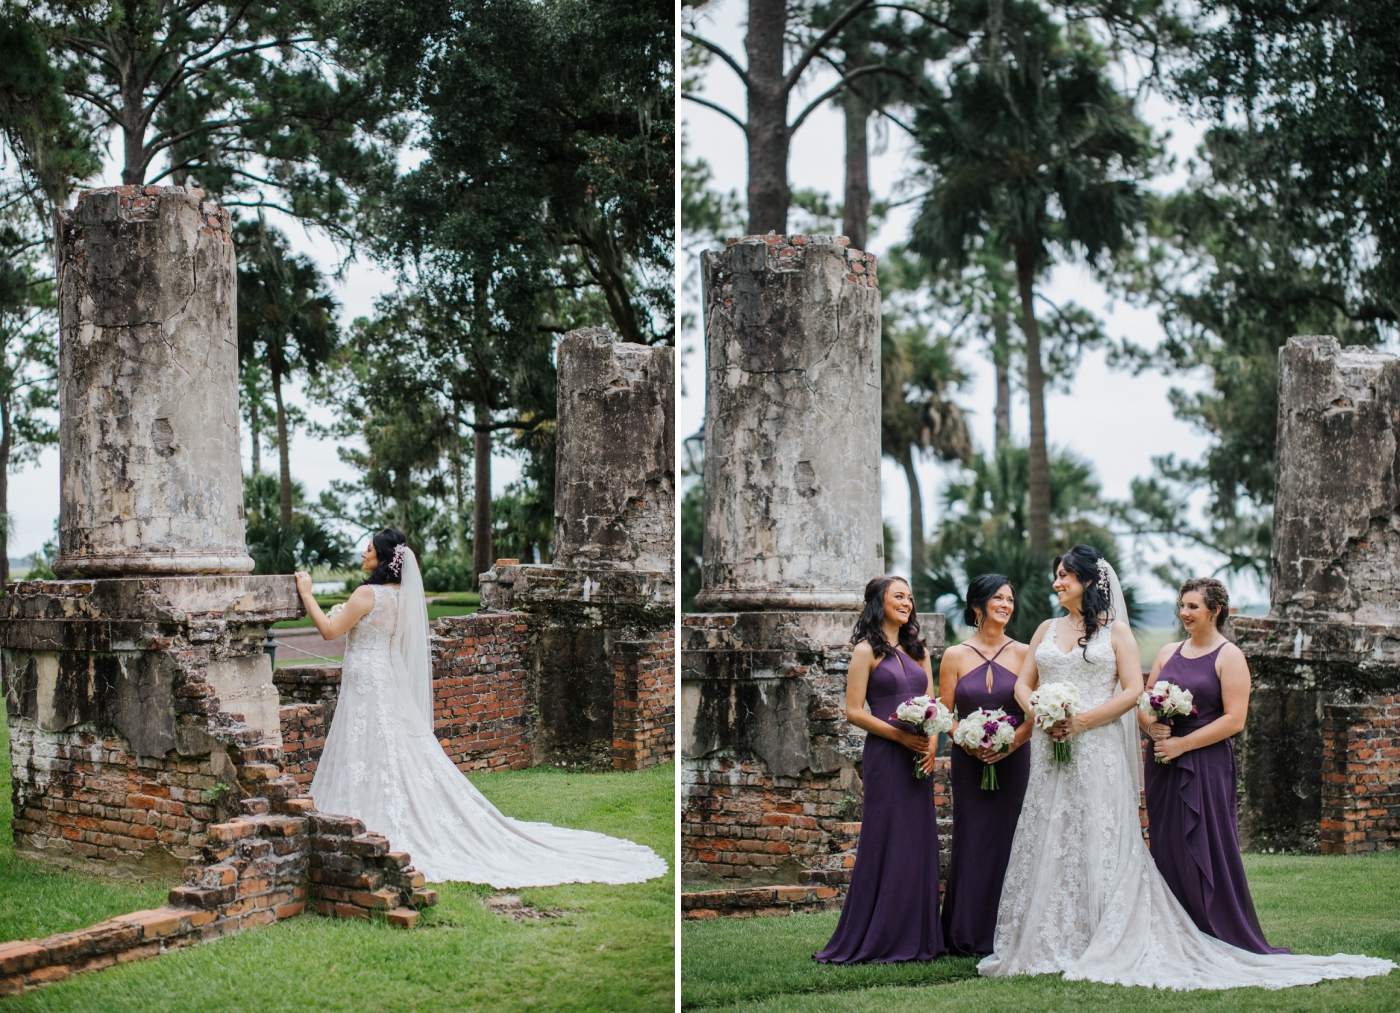 Bridesmaids in purple gowns